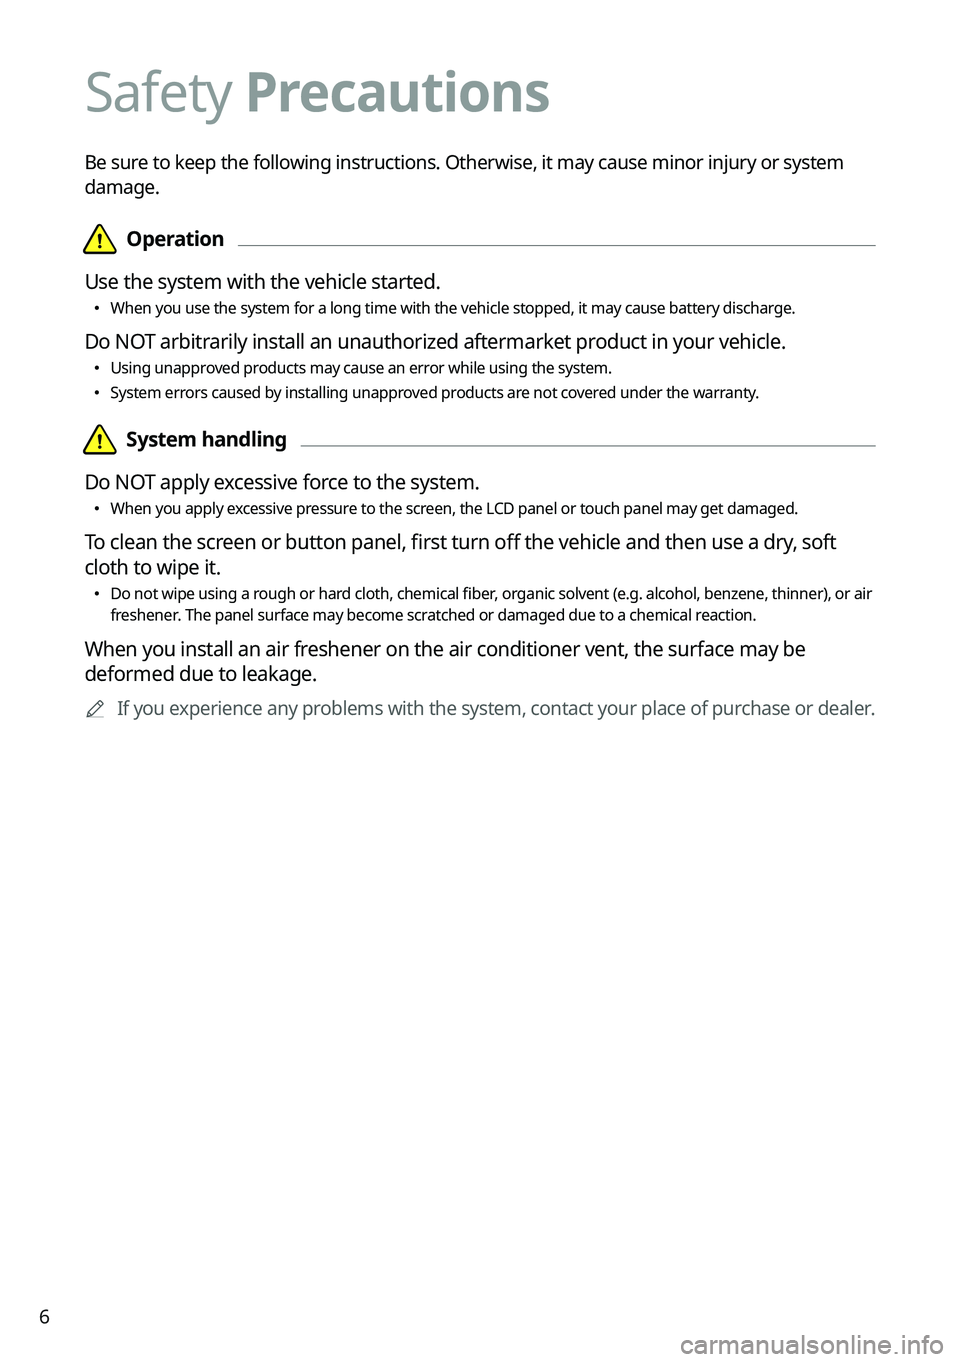 KIA CARNIVAL 2022  Navigation System Quick Reference Guide 6
Safety Precautions
Be sure to keep the following instructions. Otherwise, it may cause minor injury or system 
damage.
  